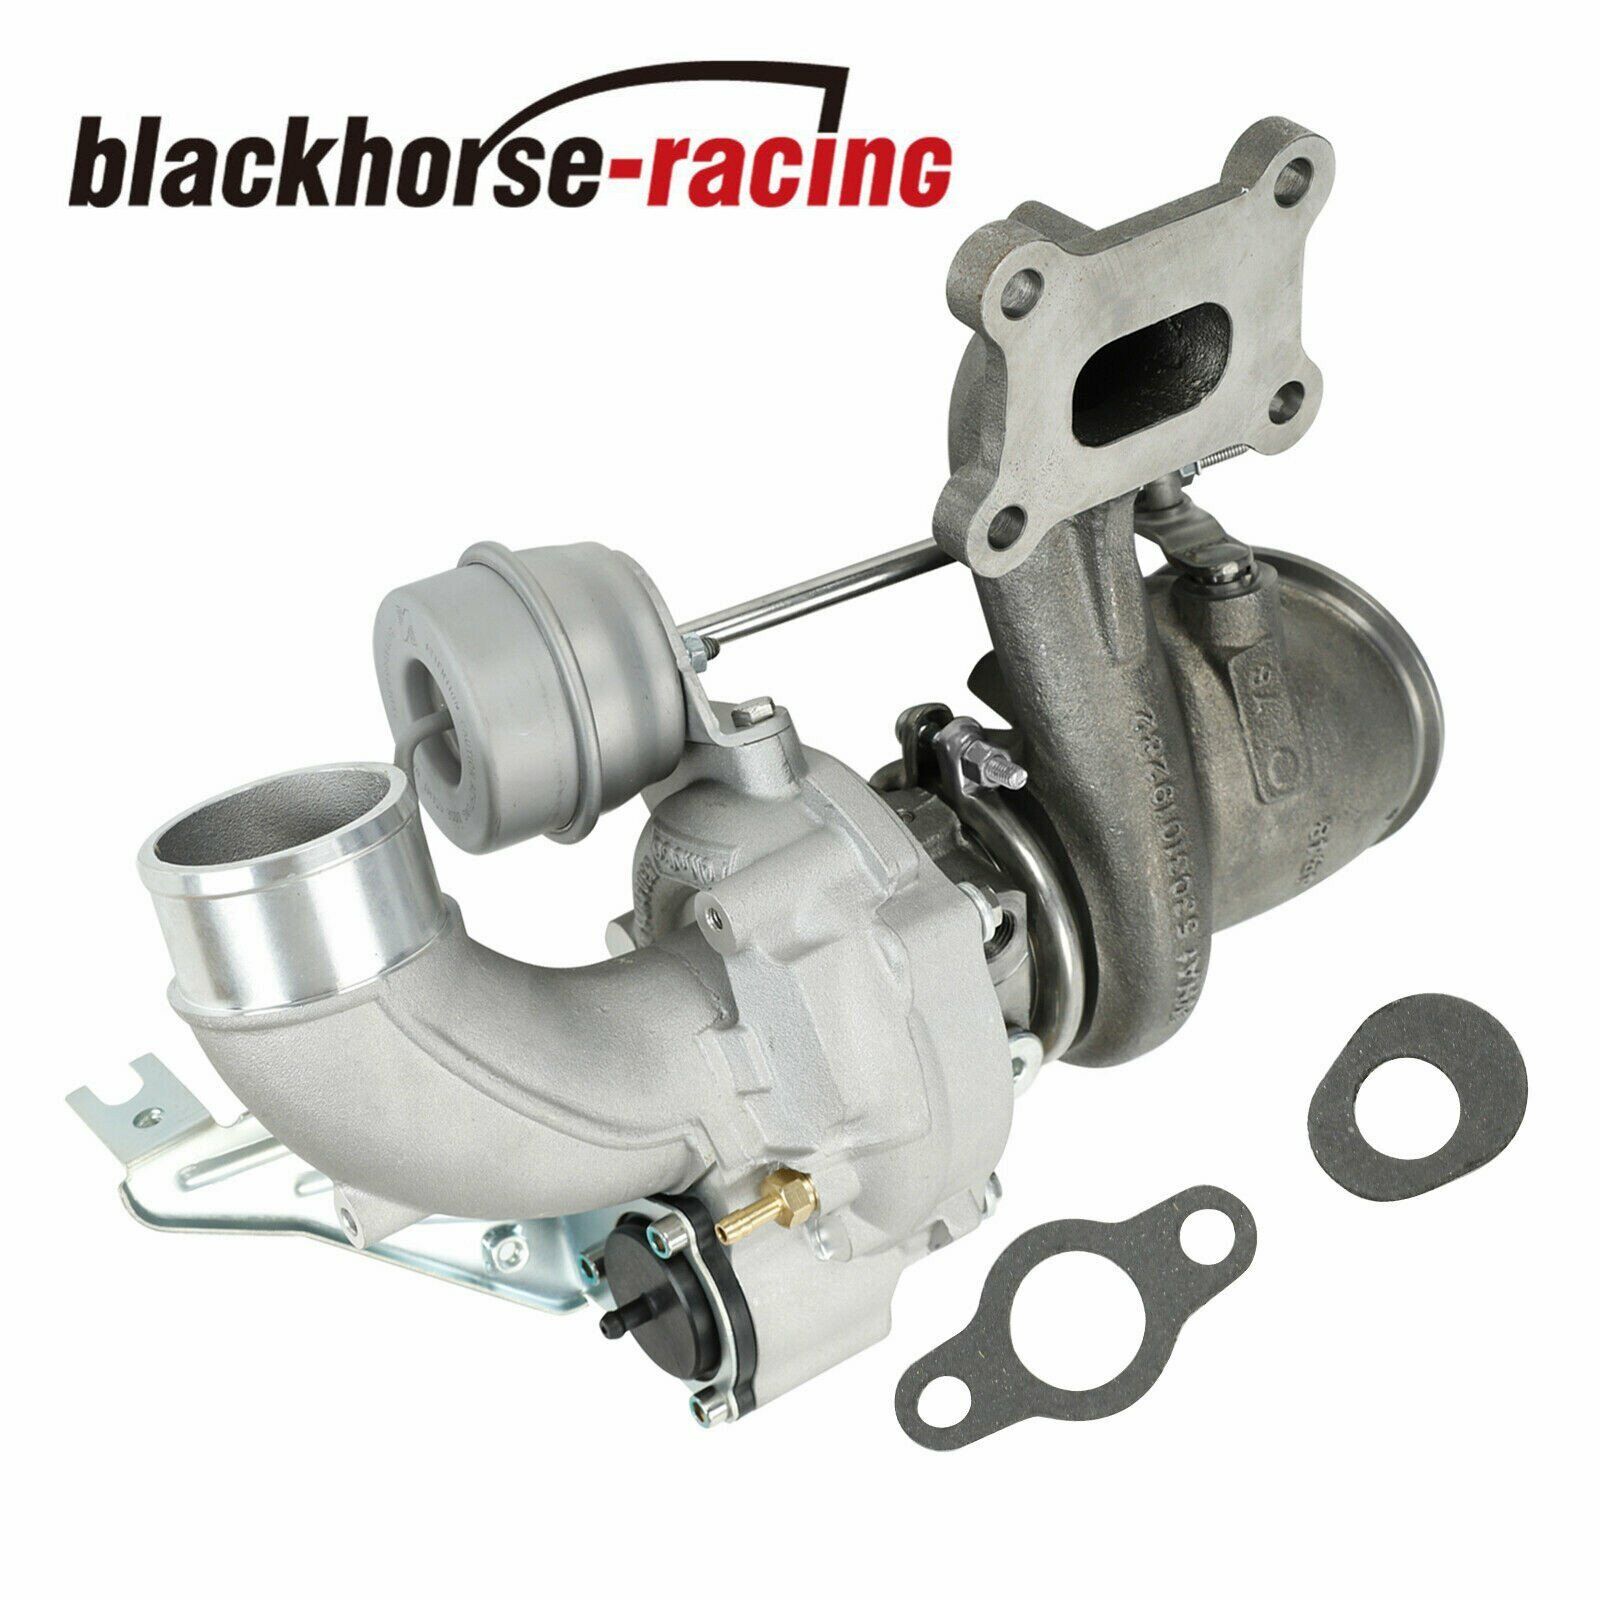 Turbo Turbocharger For 09-14 Ford Explorer Edge Focus Galaxy Ecoboost ge 2.0L